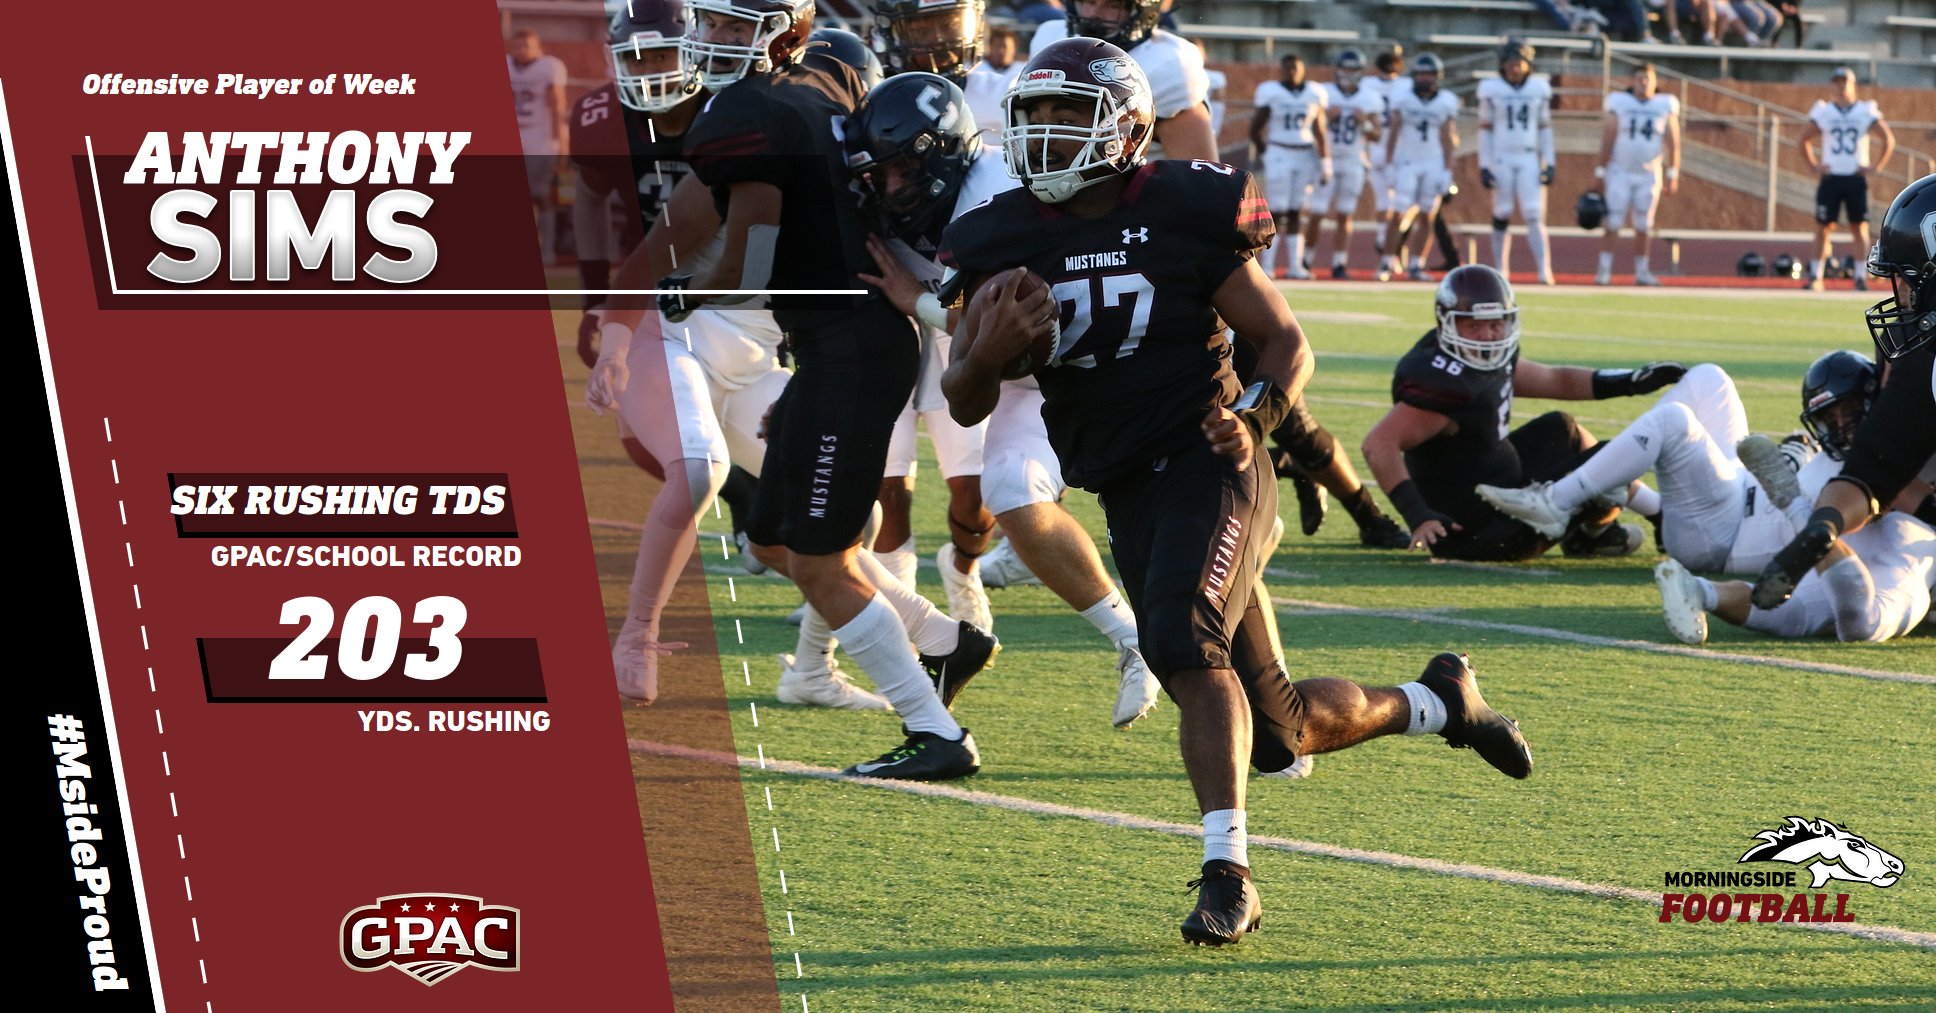 Super Saturday leads to GPAC weekly honor